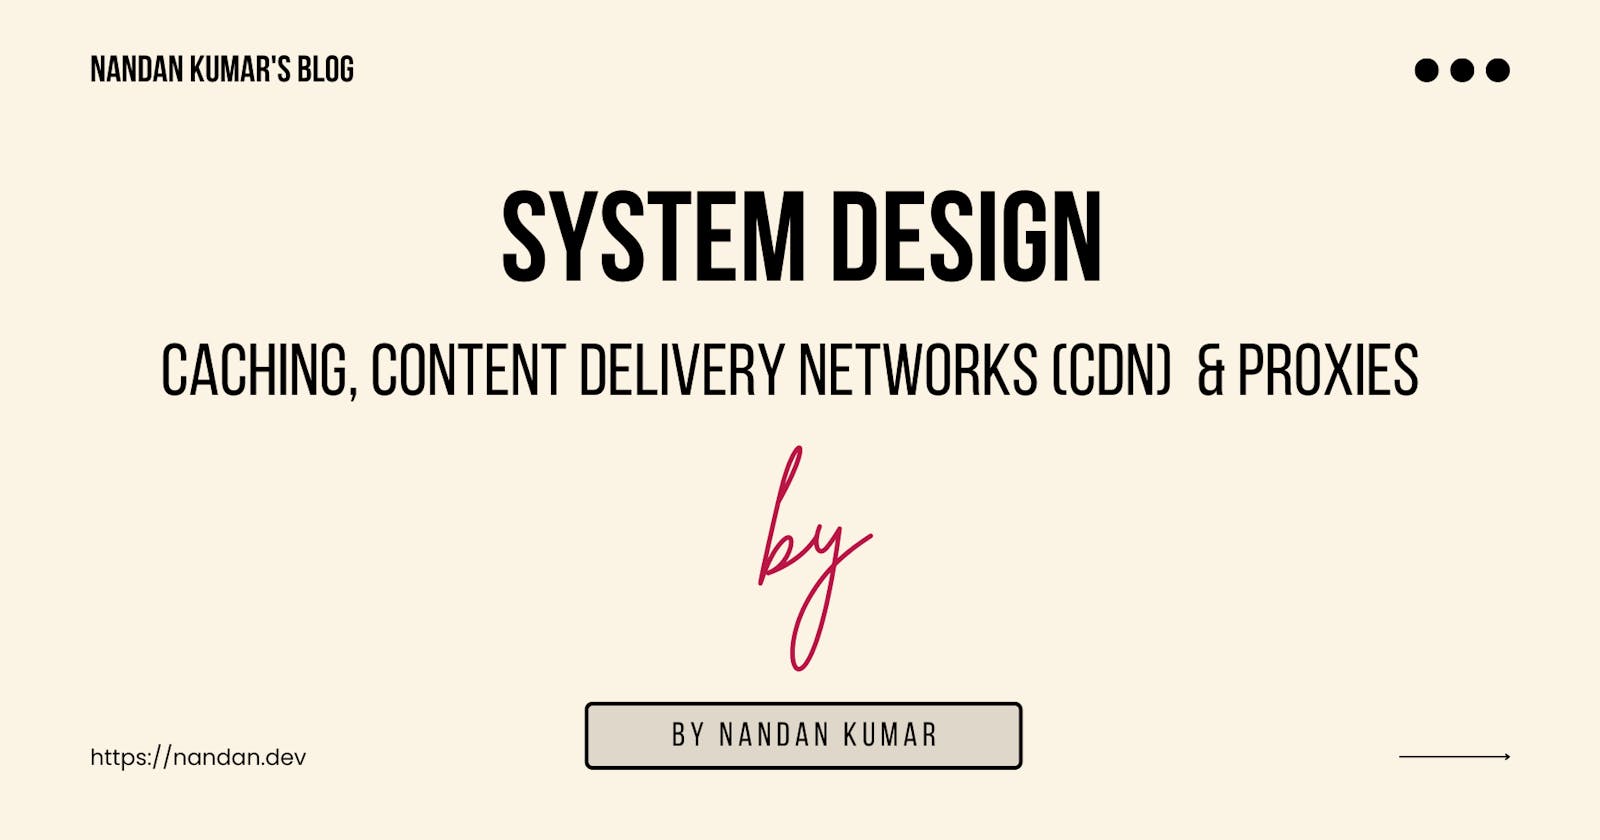 System Design: Caching, Content Delivery Networks (CDN) & Proxies.